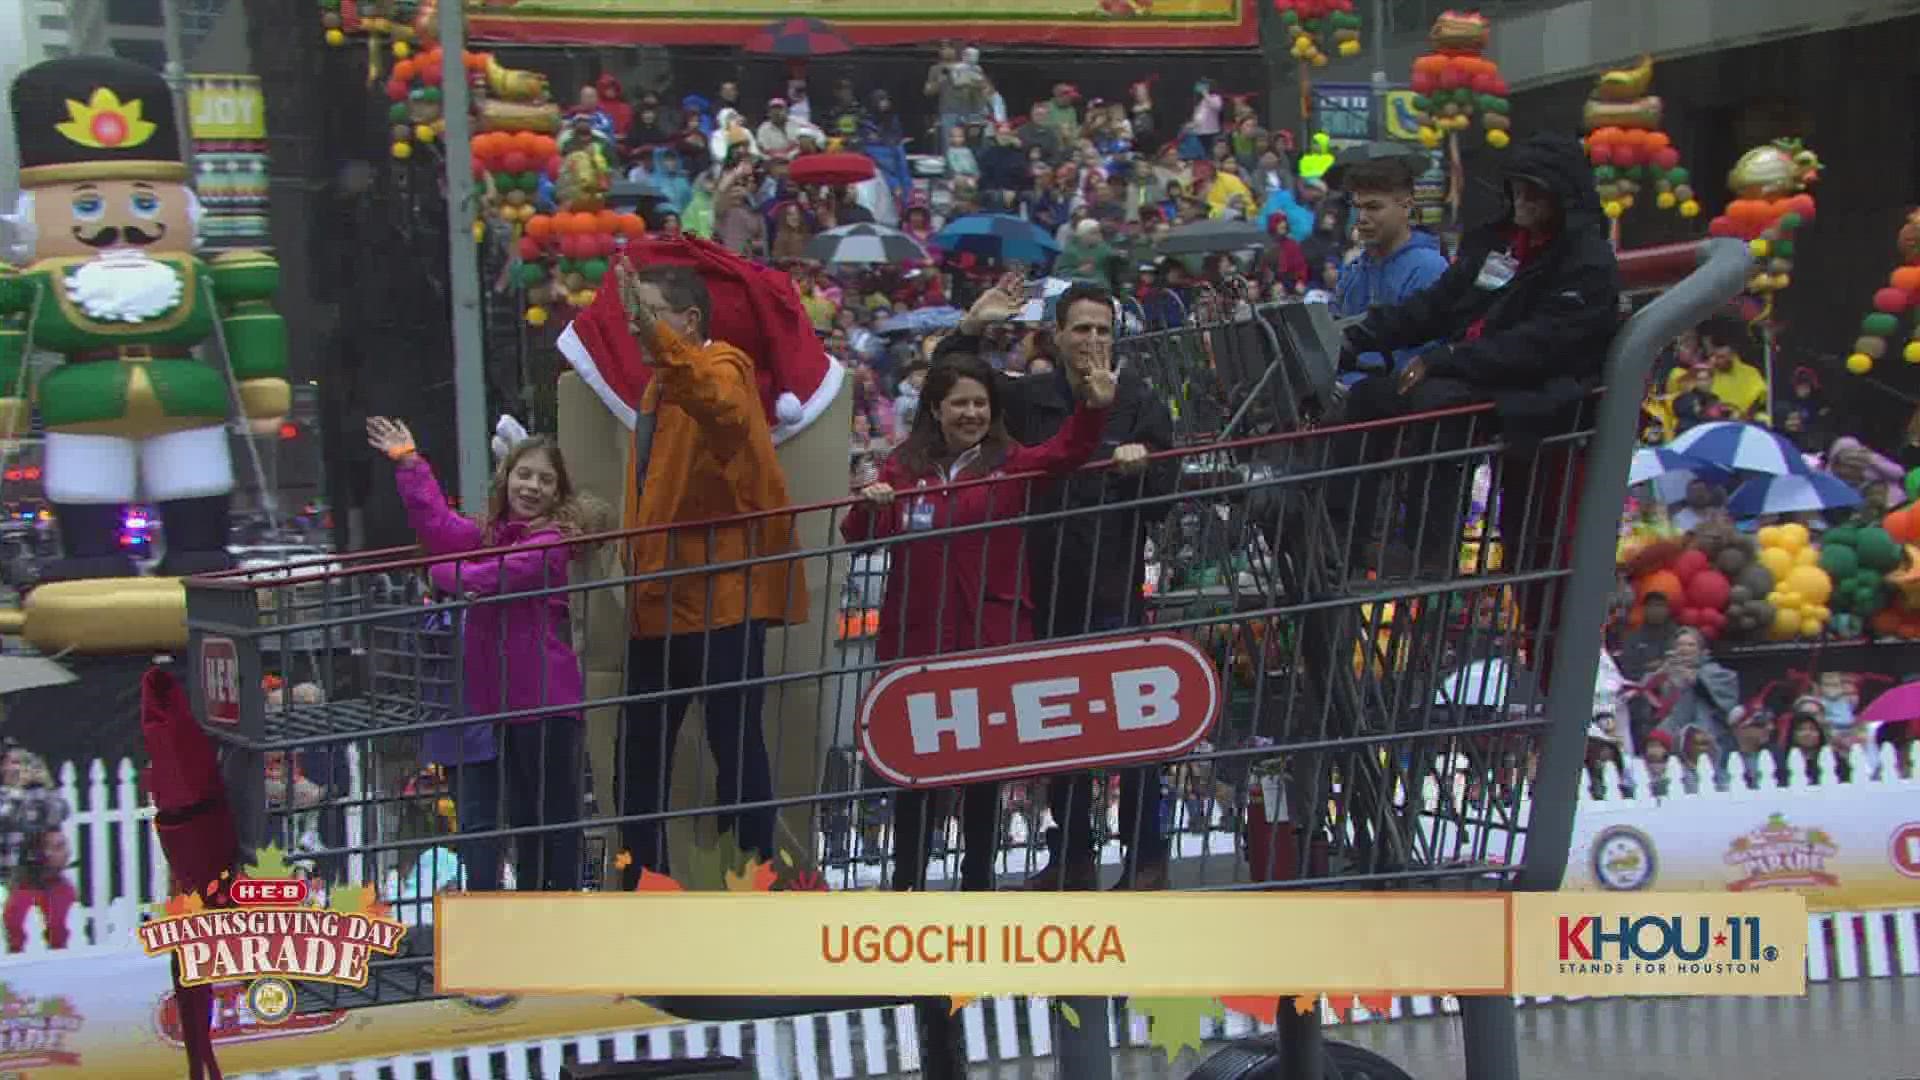 Designed 2 Dance performed during the 73rd Annual Thanksgiving Day Parade Thursday in downtown Houston.